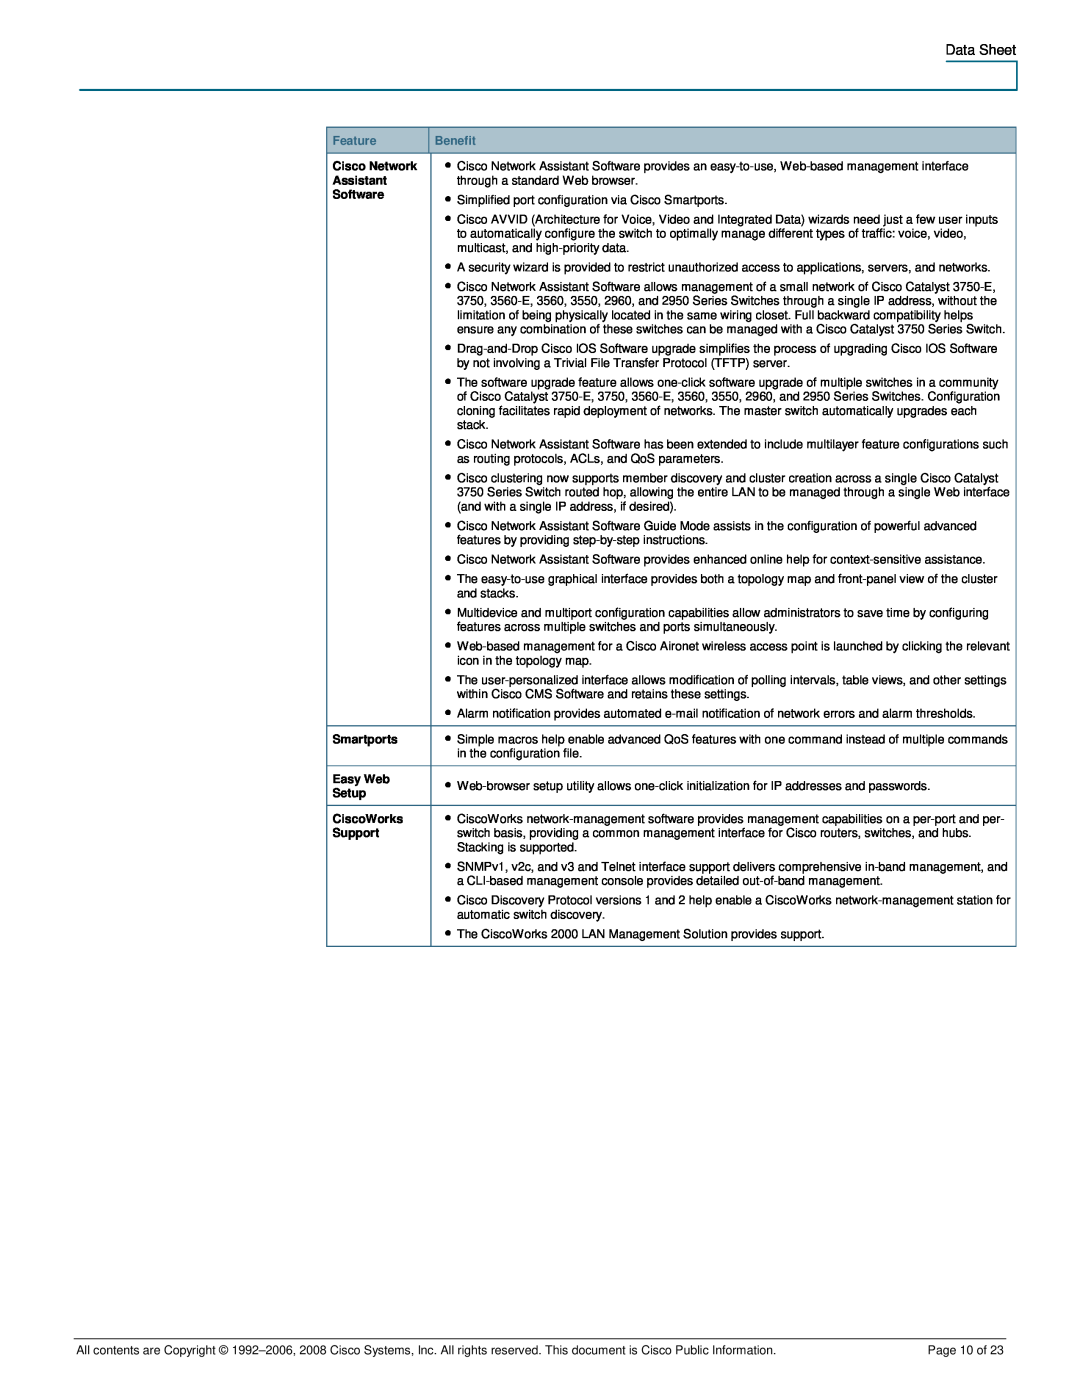 Cisco Systems 3750-24PS, 3750-48PS manual Data Sheet, Feature, Benefit, Page 10 of 